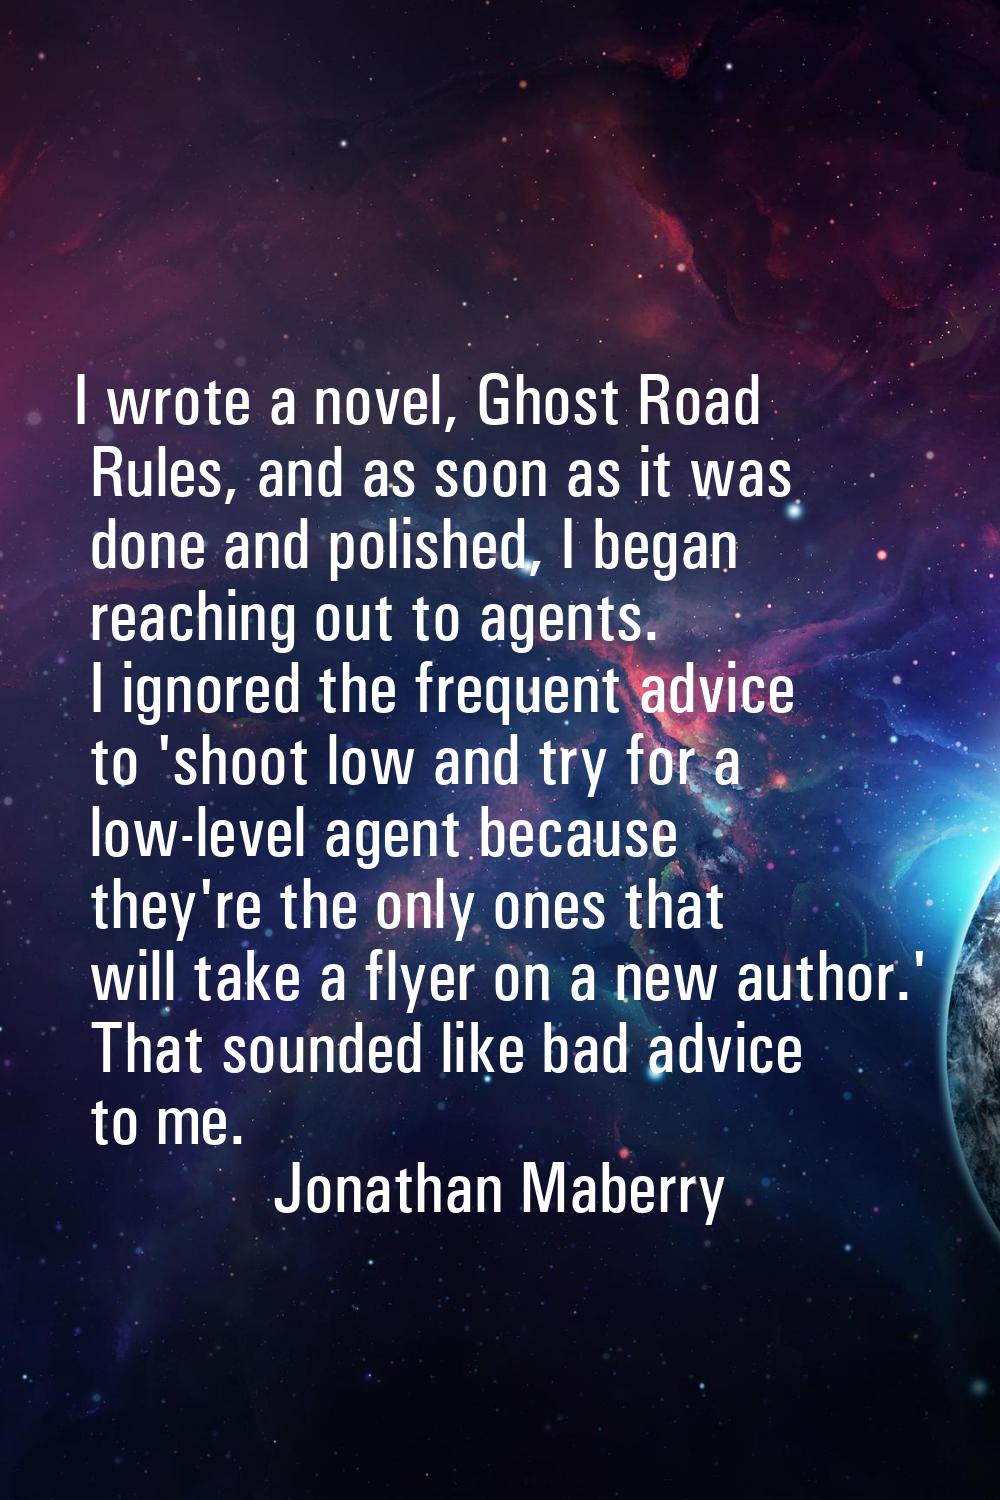 I wrote a novel, Ghost Road Rules, and as soon as it was done and polished, I began reaching out to